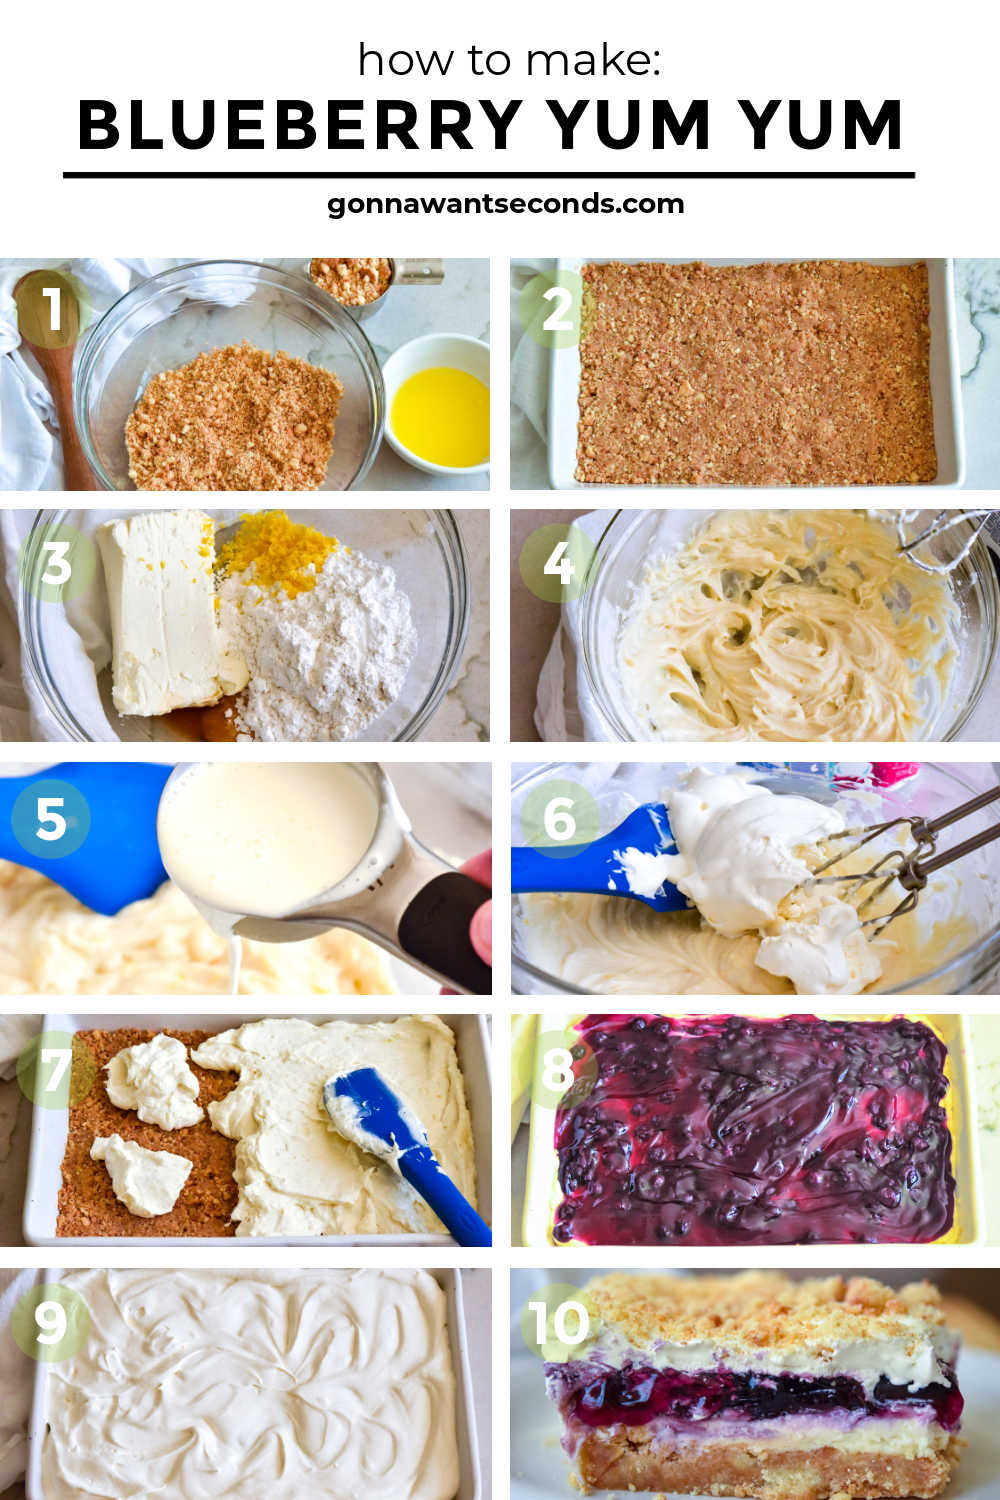 Step by step how to make blueberry yum yum